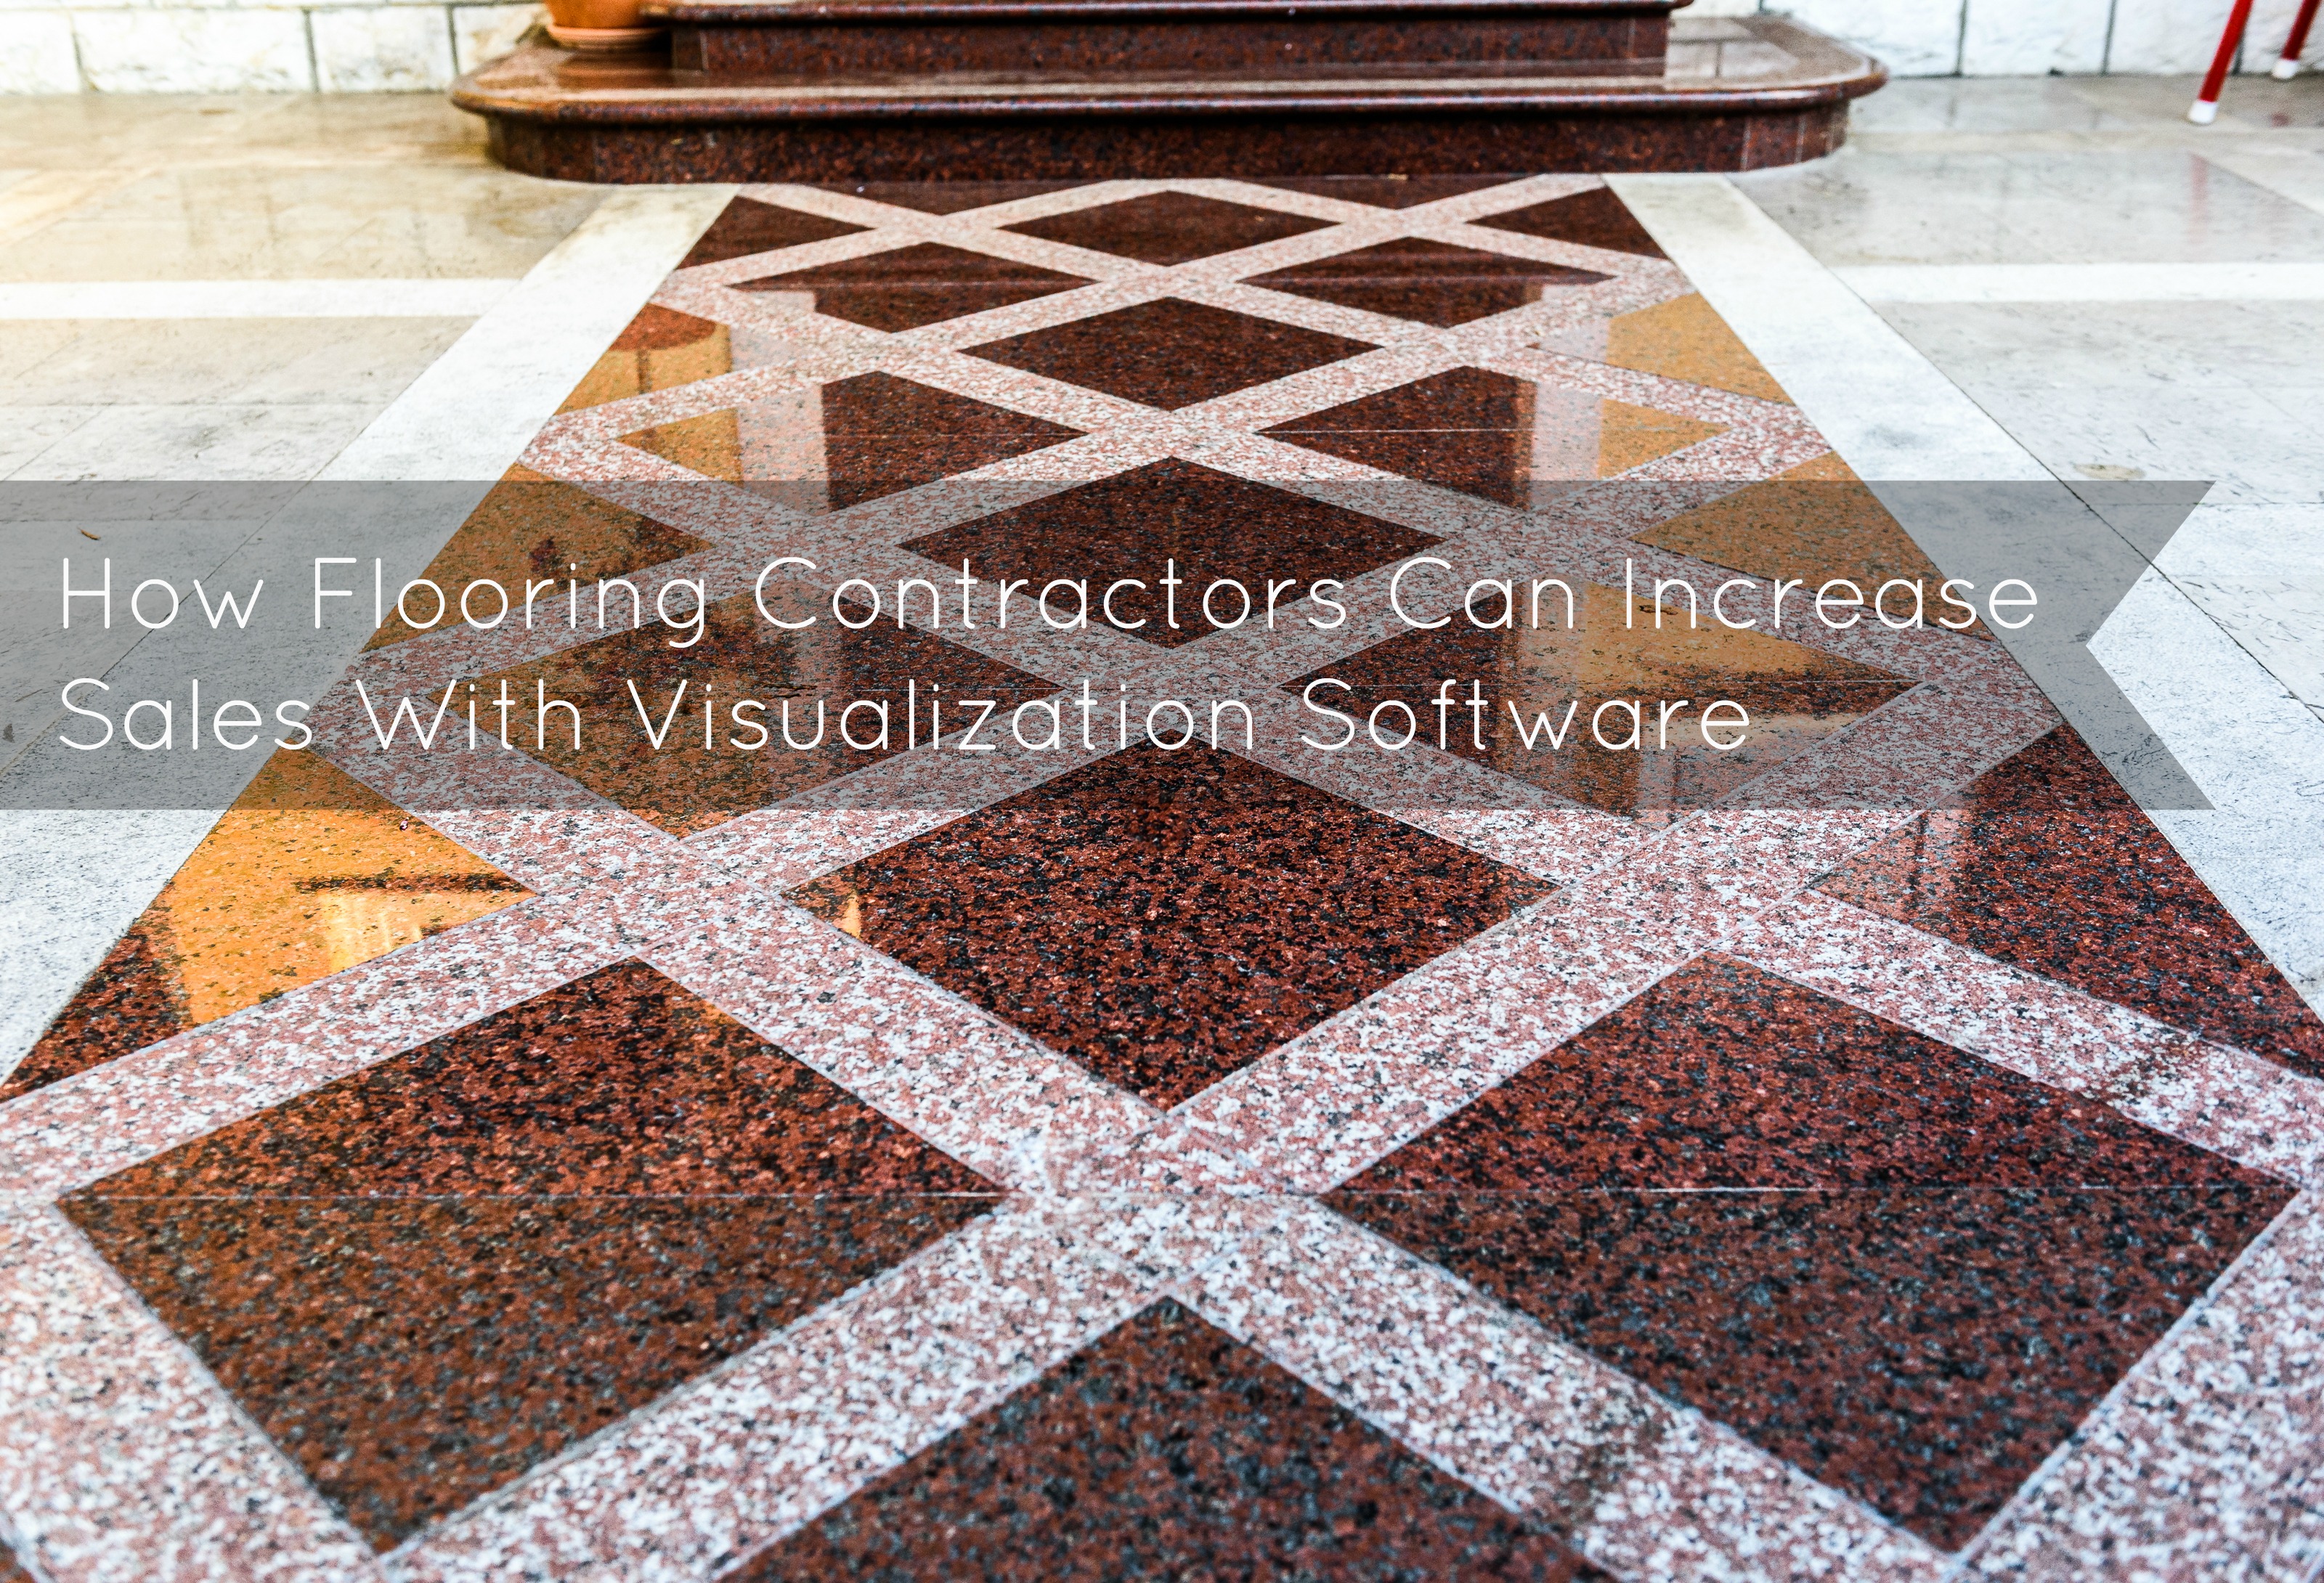 How Flooring Contractors Can Increase Sales With Visualization Software